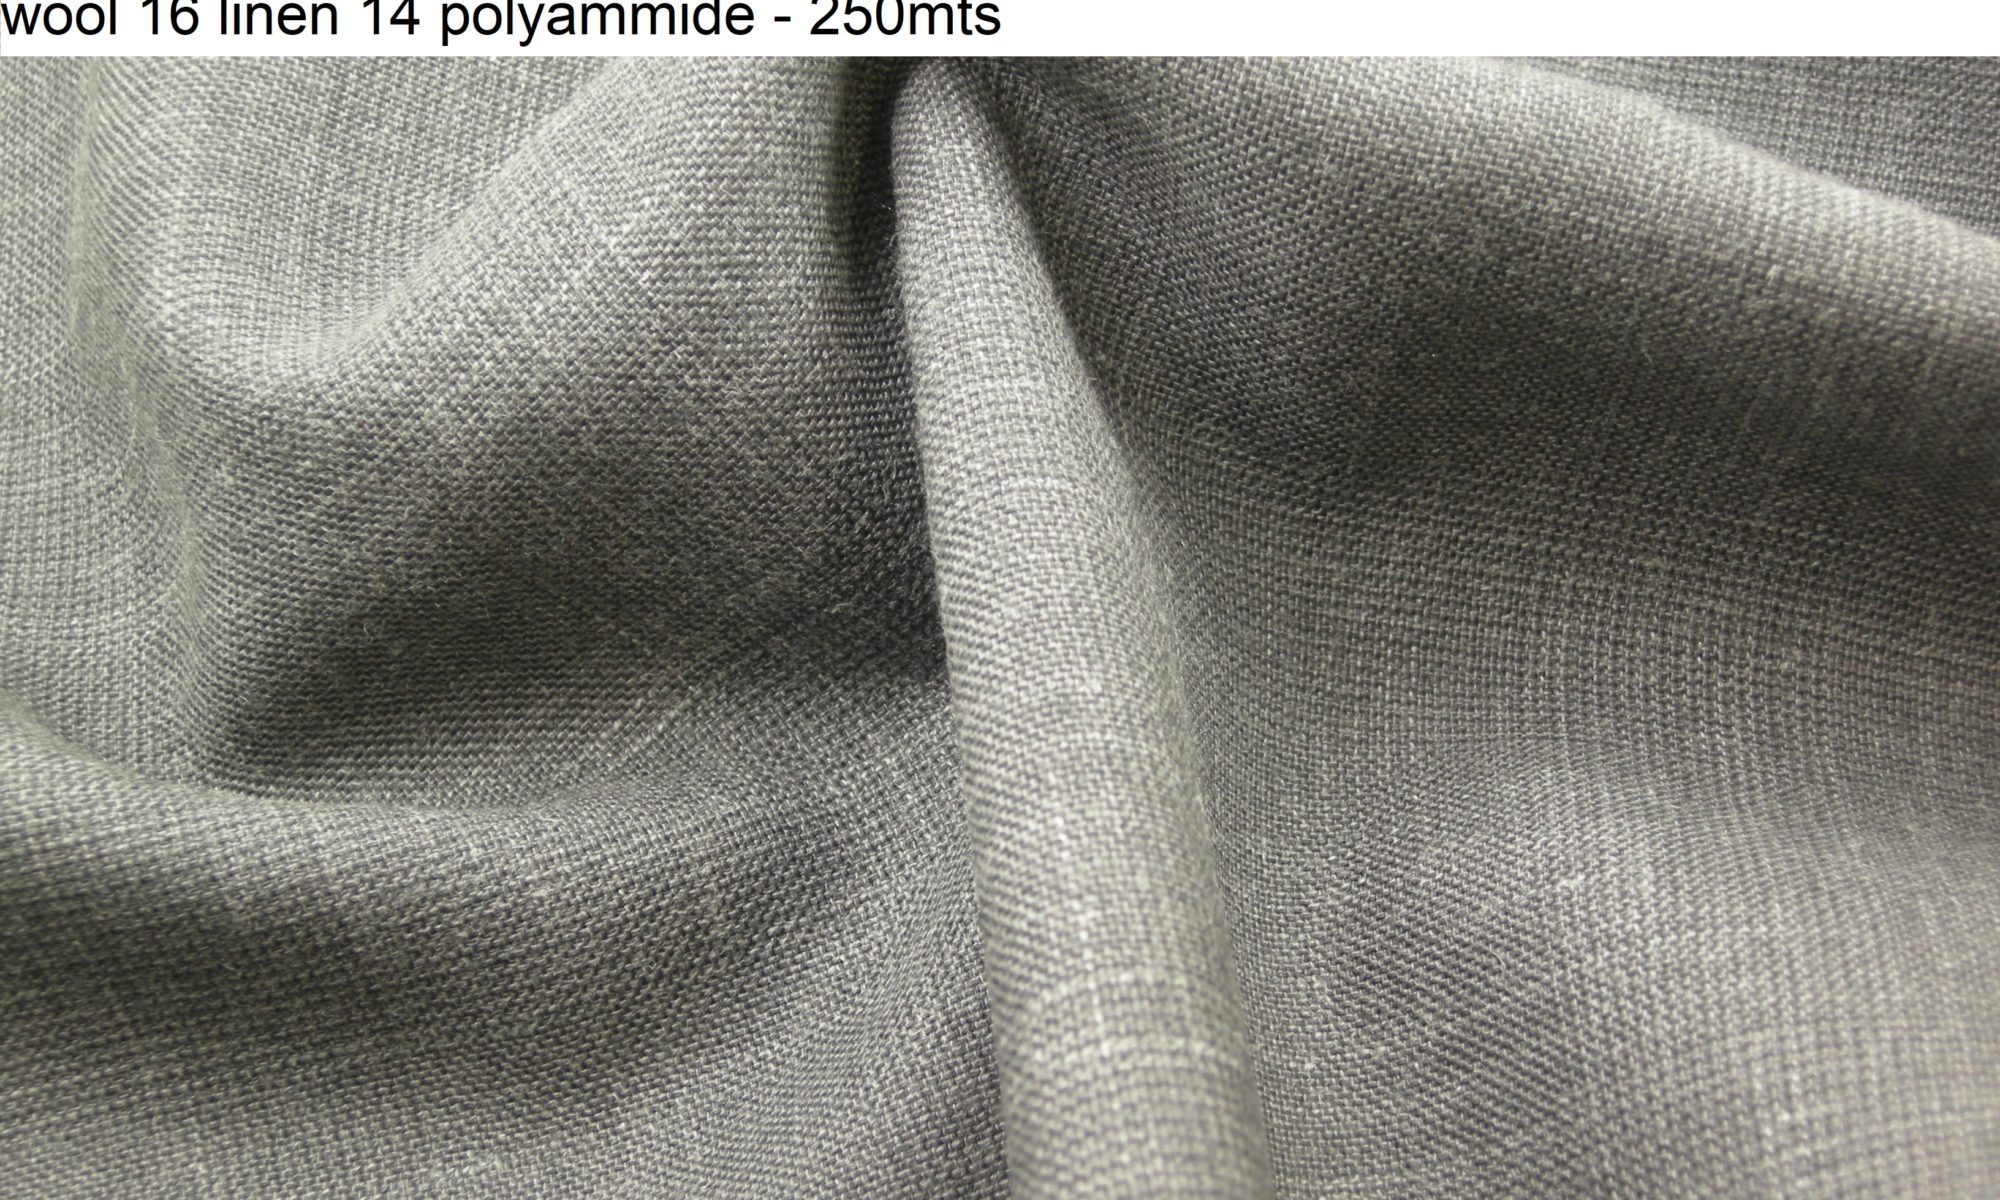 ART 7367 glen plaid prince of wales wool linen blend jacket fashion fabric WIDTH cm150 WEIGHT gr300 - gr200 square meter - COMPOSITION 70 wool 16 linen 14 polyammide - 250mts